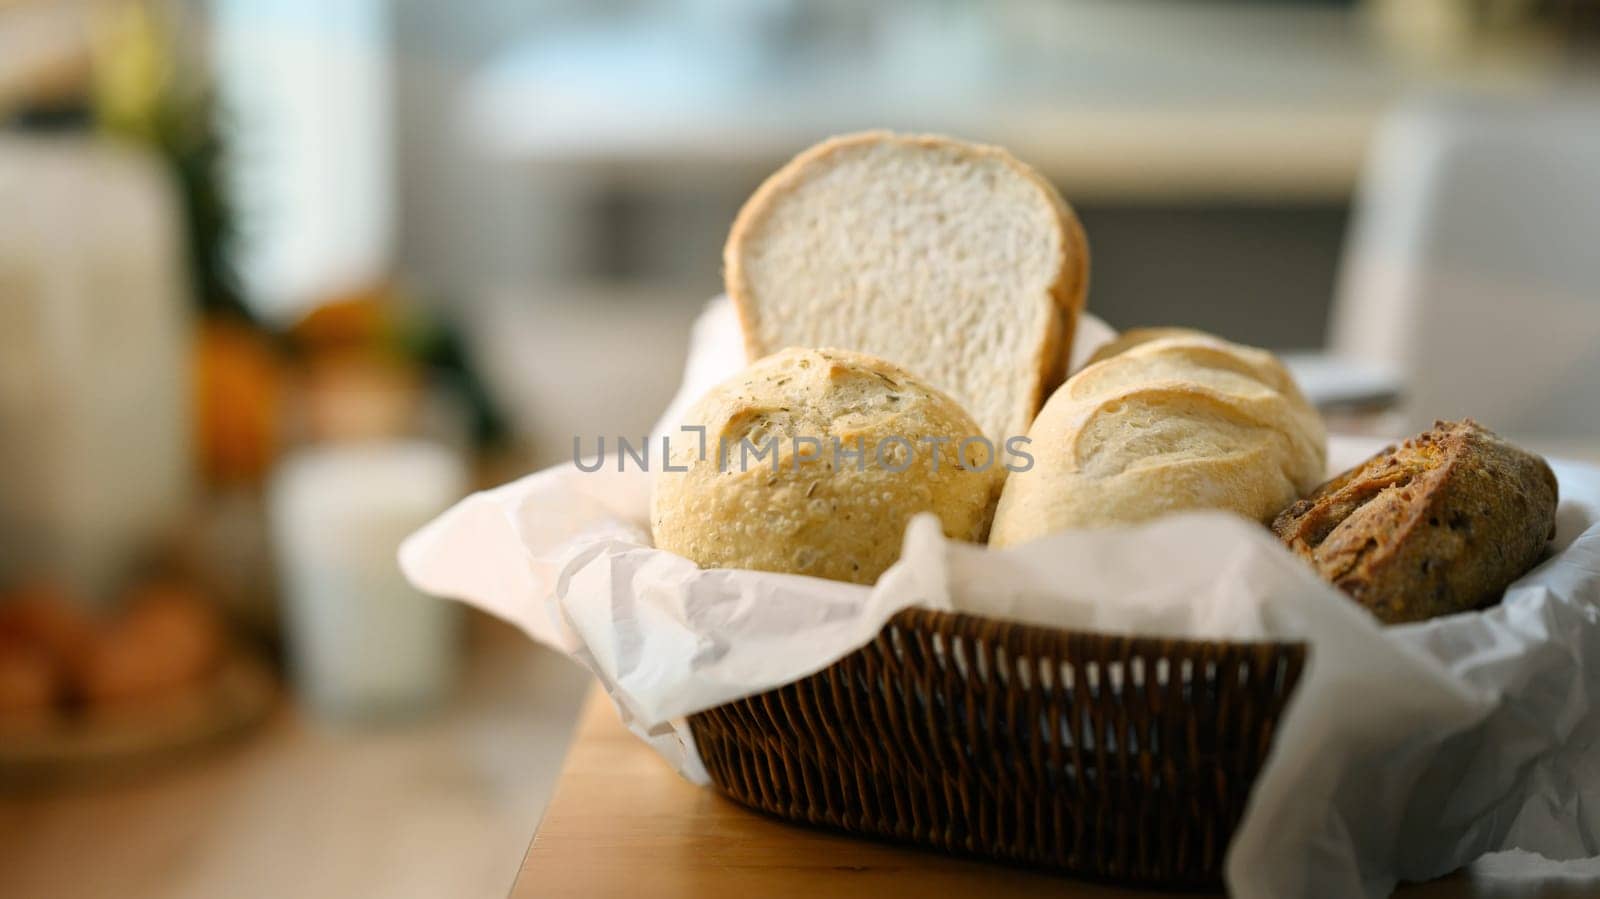 Fresh homemade bread in basket on wooden table in kitchen. Healthy eating and traditional bakery concept.